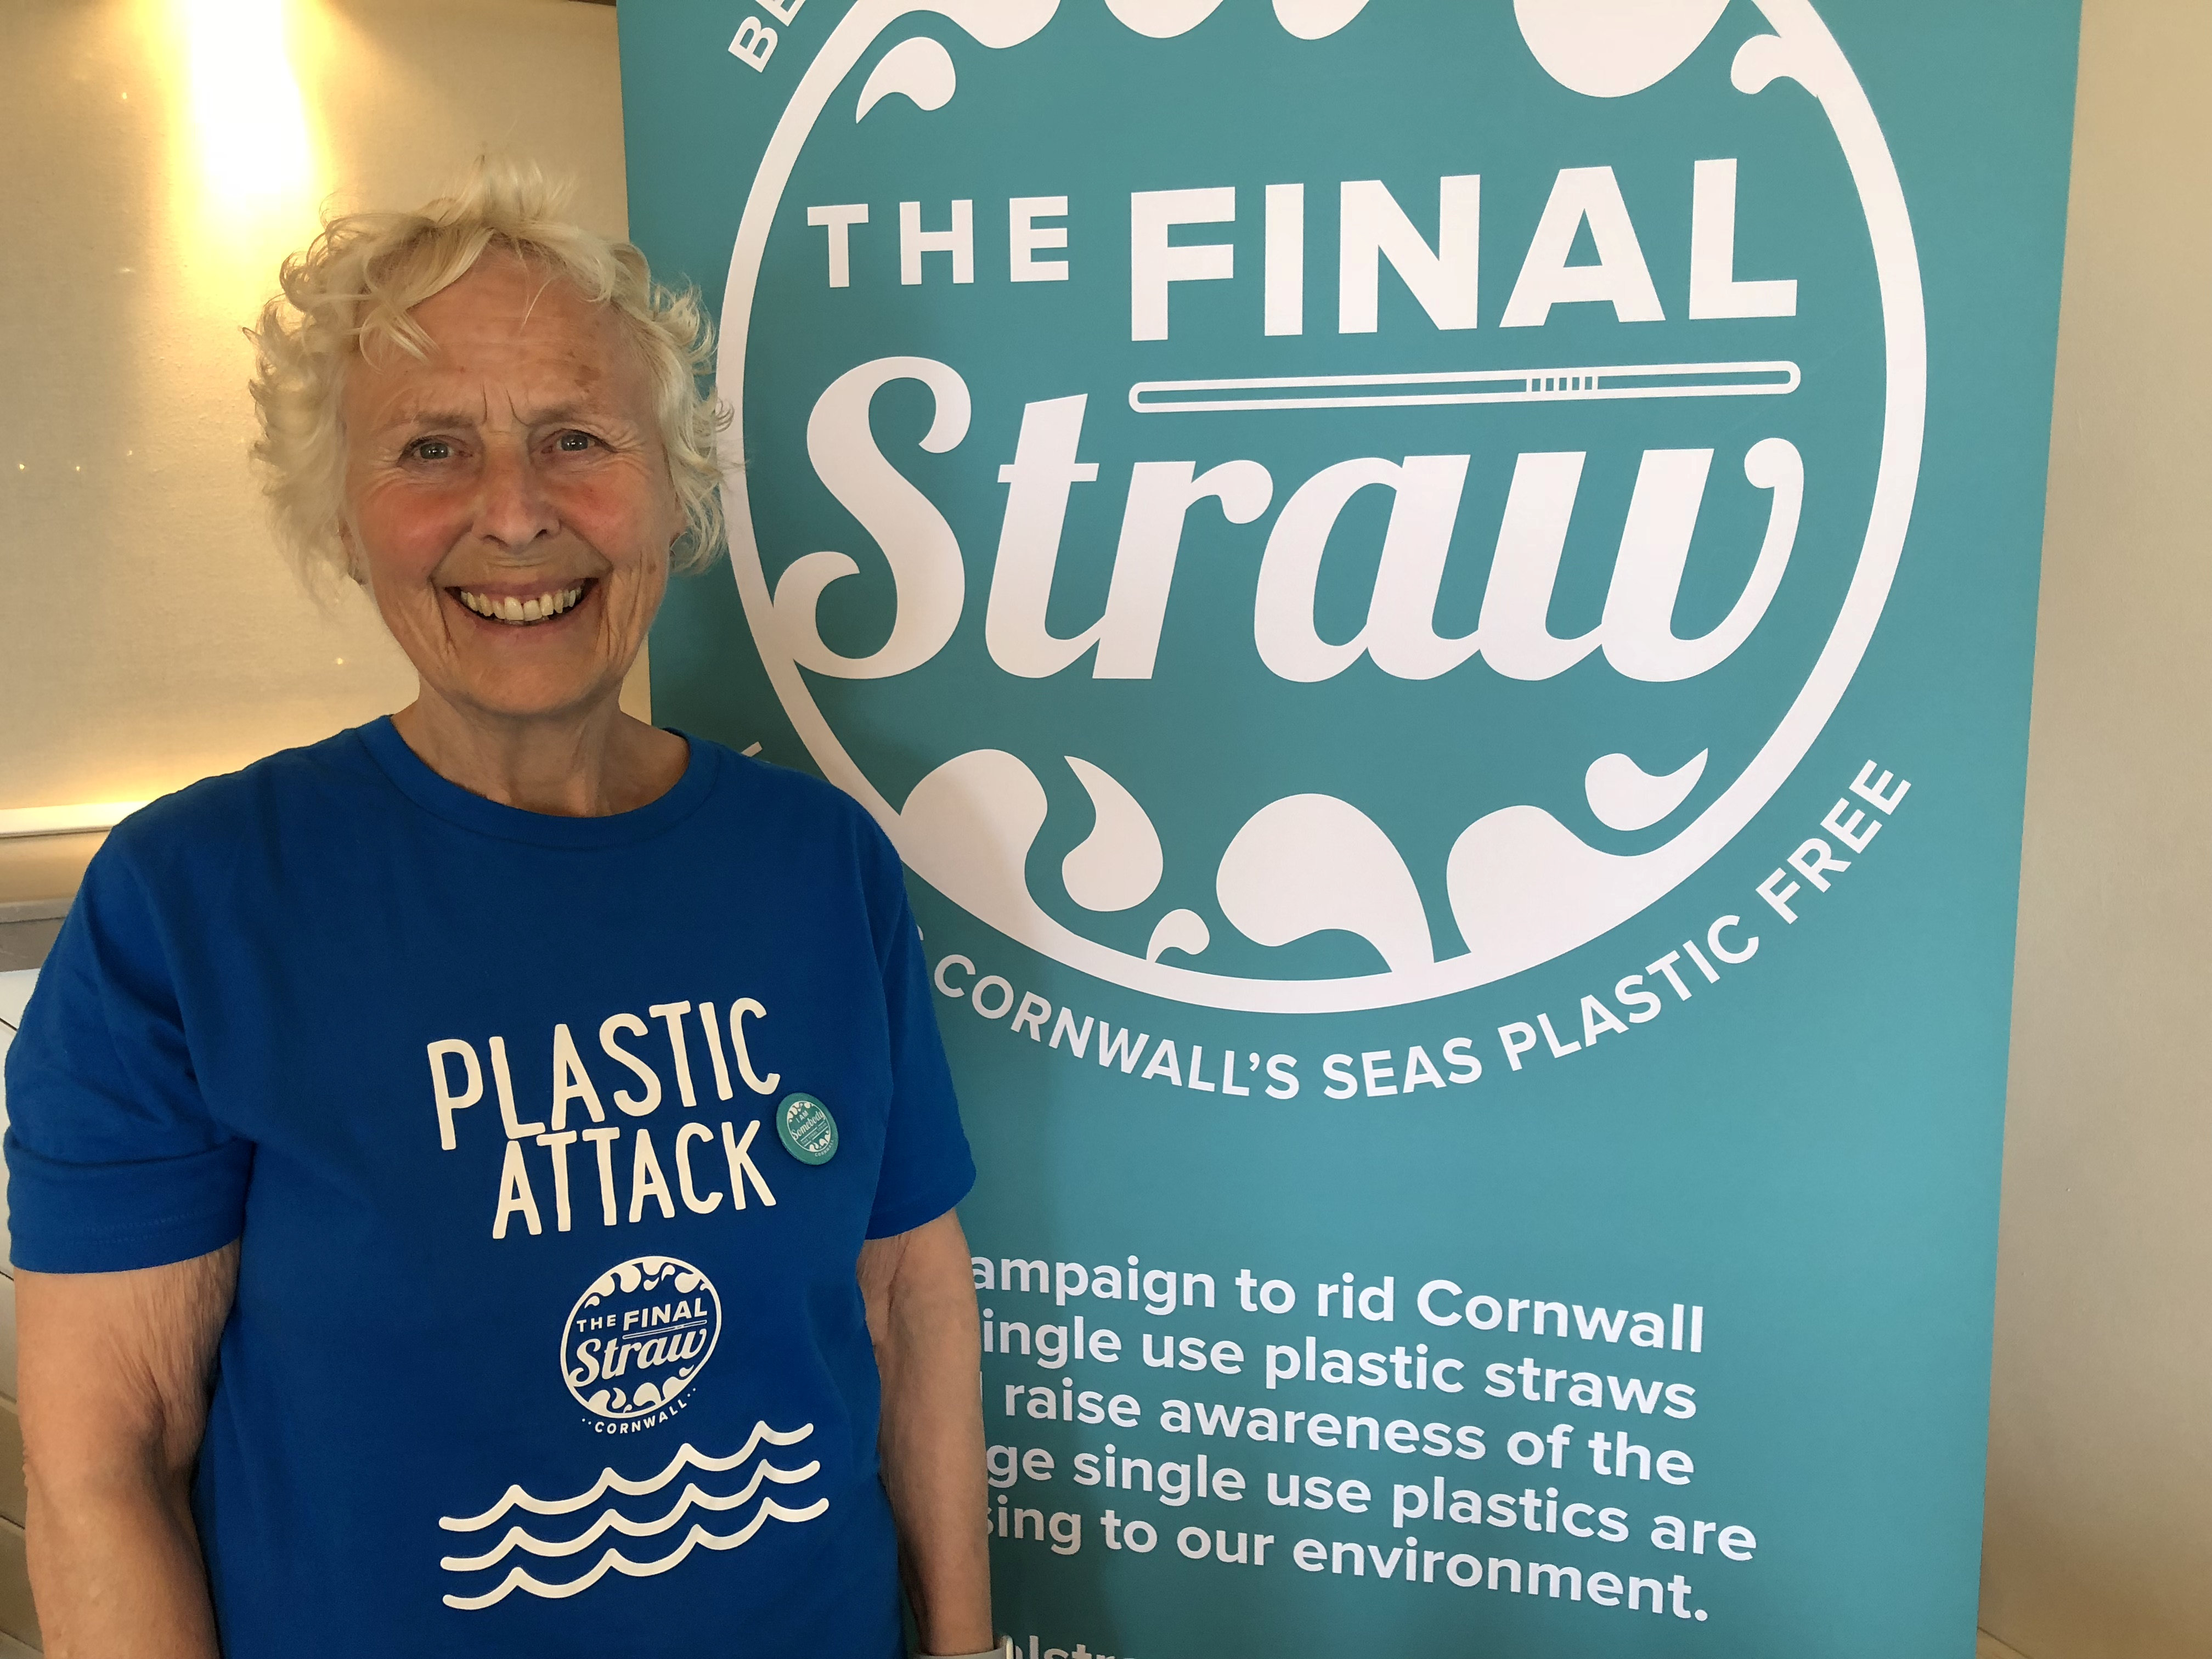 ‘Our mission is to make Cornwall the first plastic straw free county in the UK, thereby protecting our coast and wildlife.’ The brainchild of Cornwall resident Pat Smith, The Final Straw was launched in the summer of 2017.